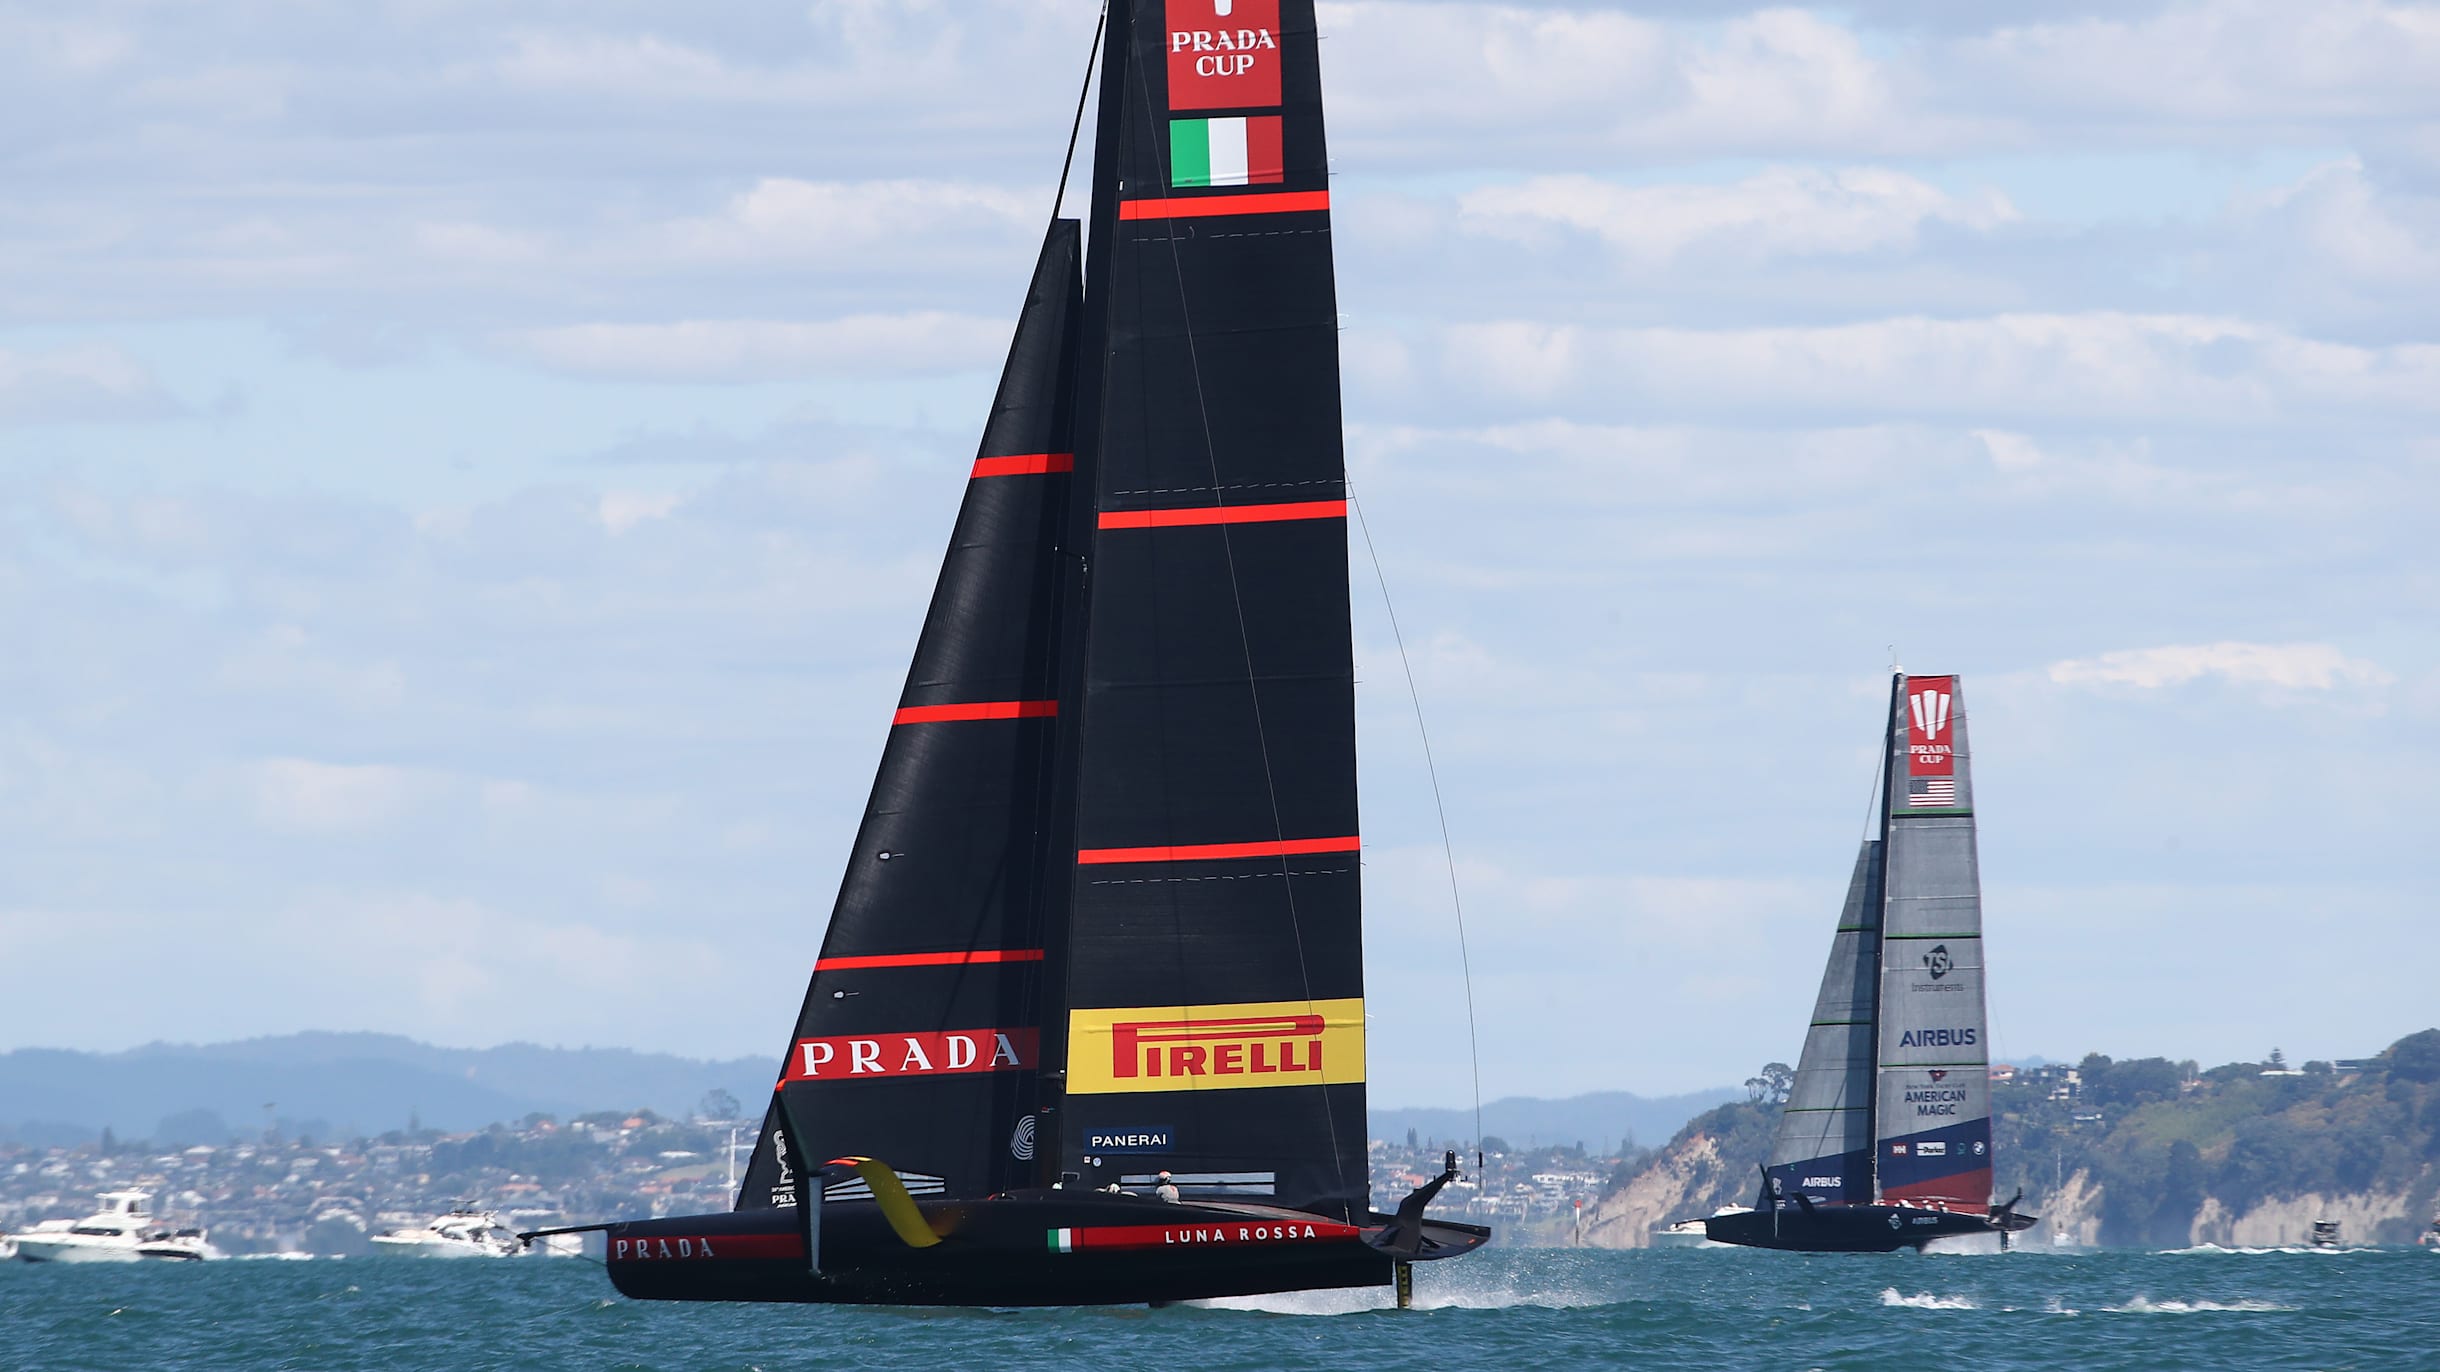 The Italian yacht of Team Luna Rossa shown in action during the